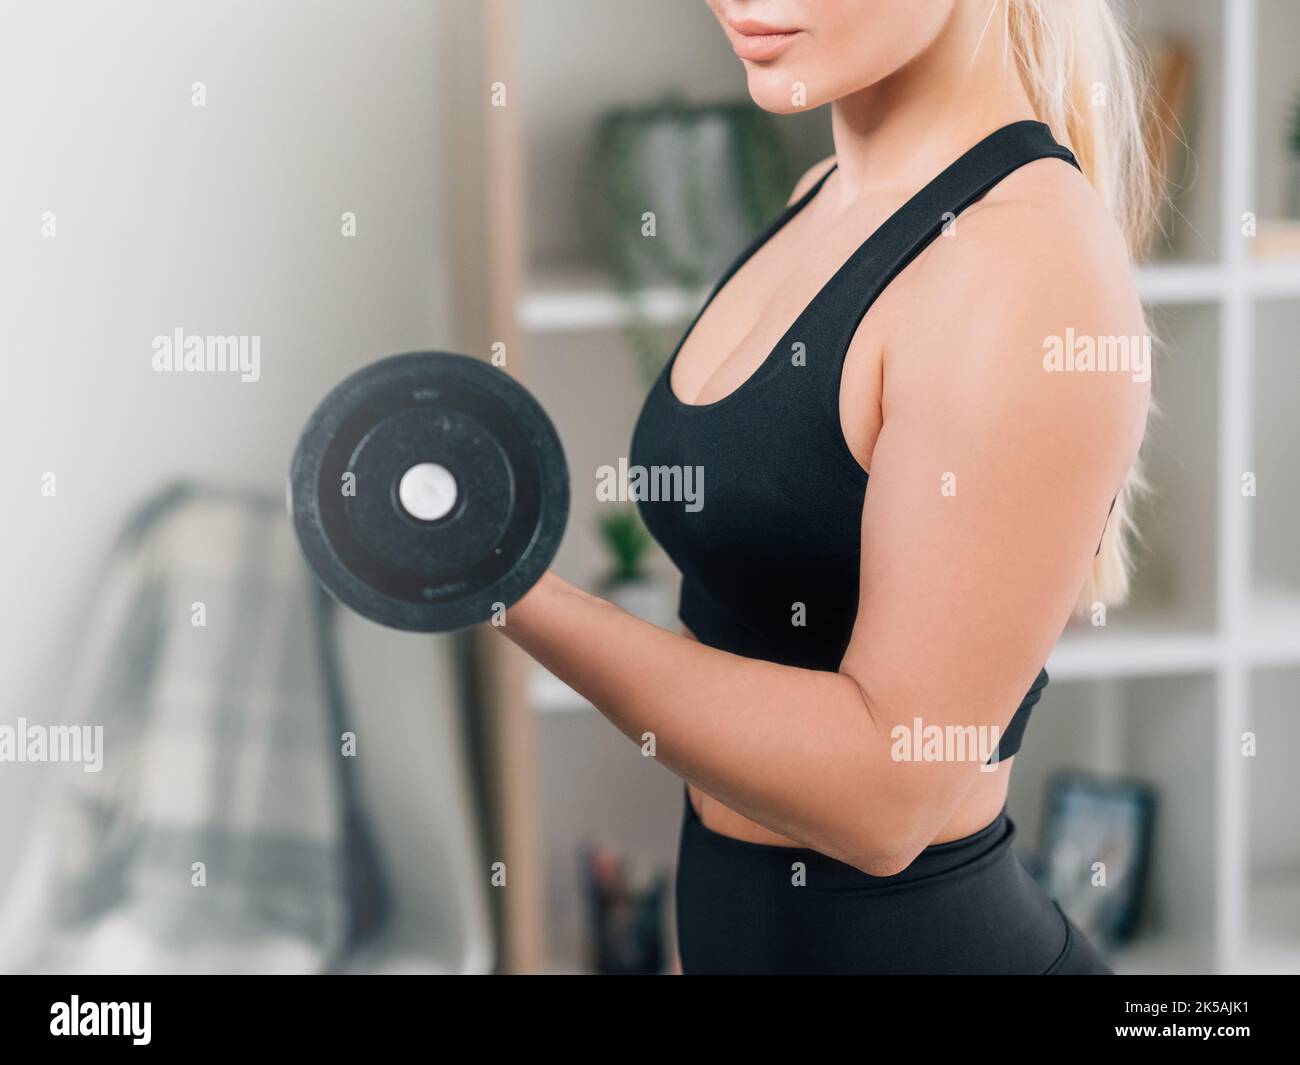 bodybuilding fitness athletic woman home training Stock Photo